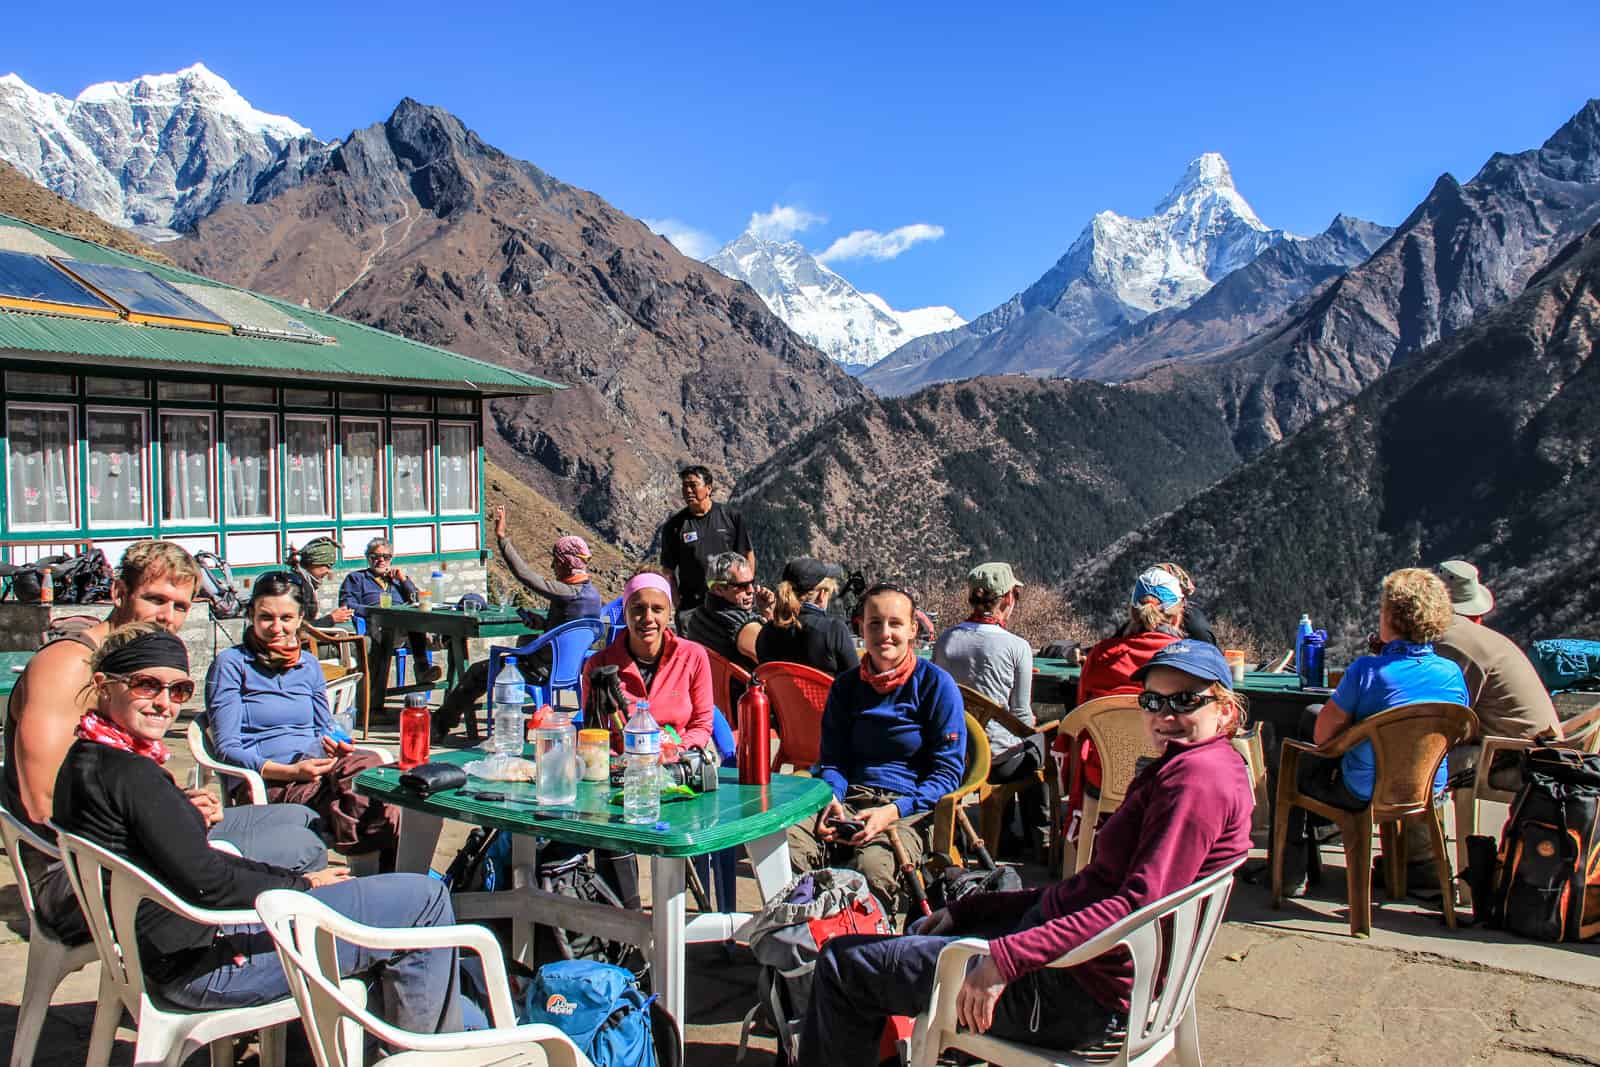 A small group of trekkers gathered around a table outside a green Nepalese tea house, backed by high mountain vistas – a typical rest stop on the Everest Base Camp trek